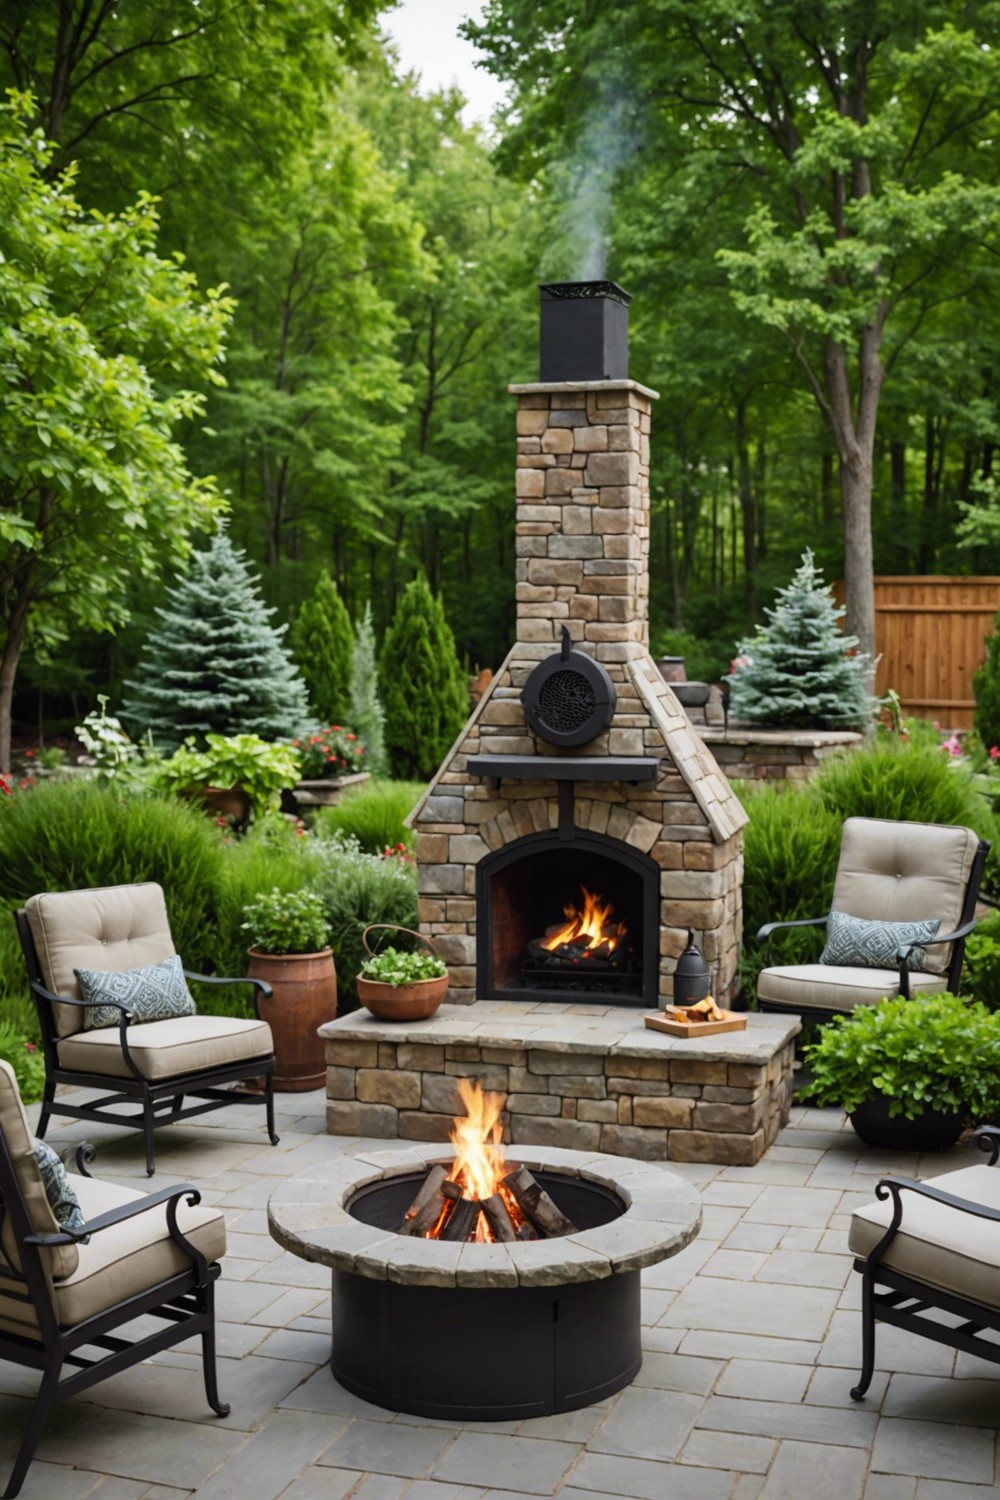 Stone-Faced Outdoor Fireplace with Metal Chiminea